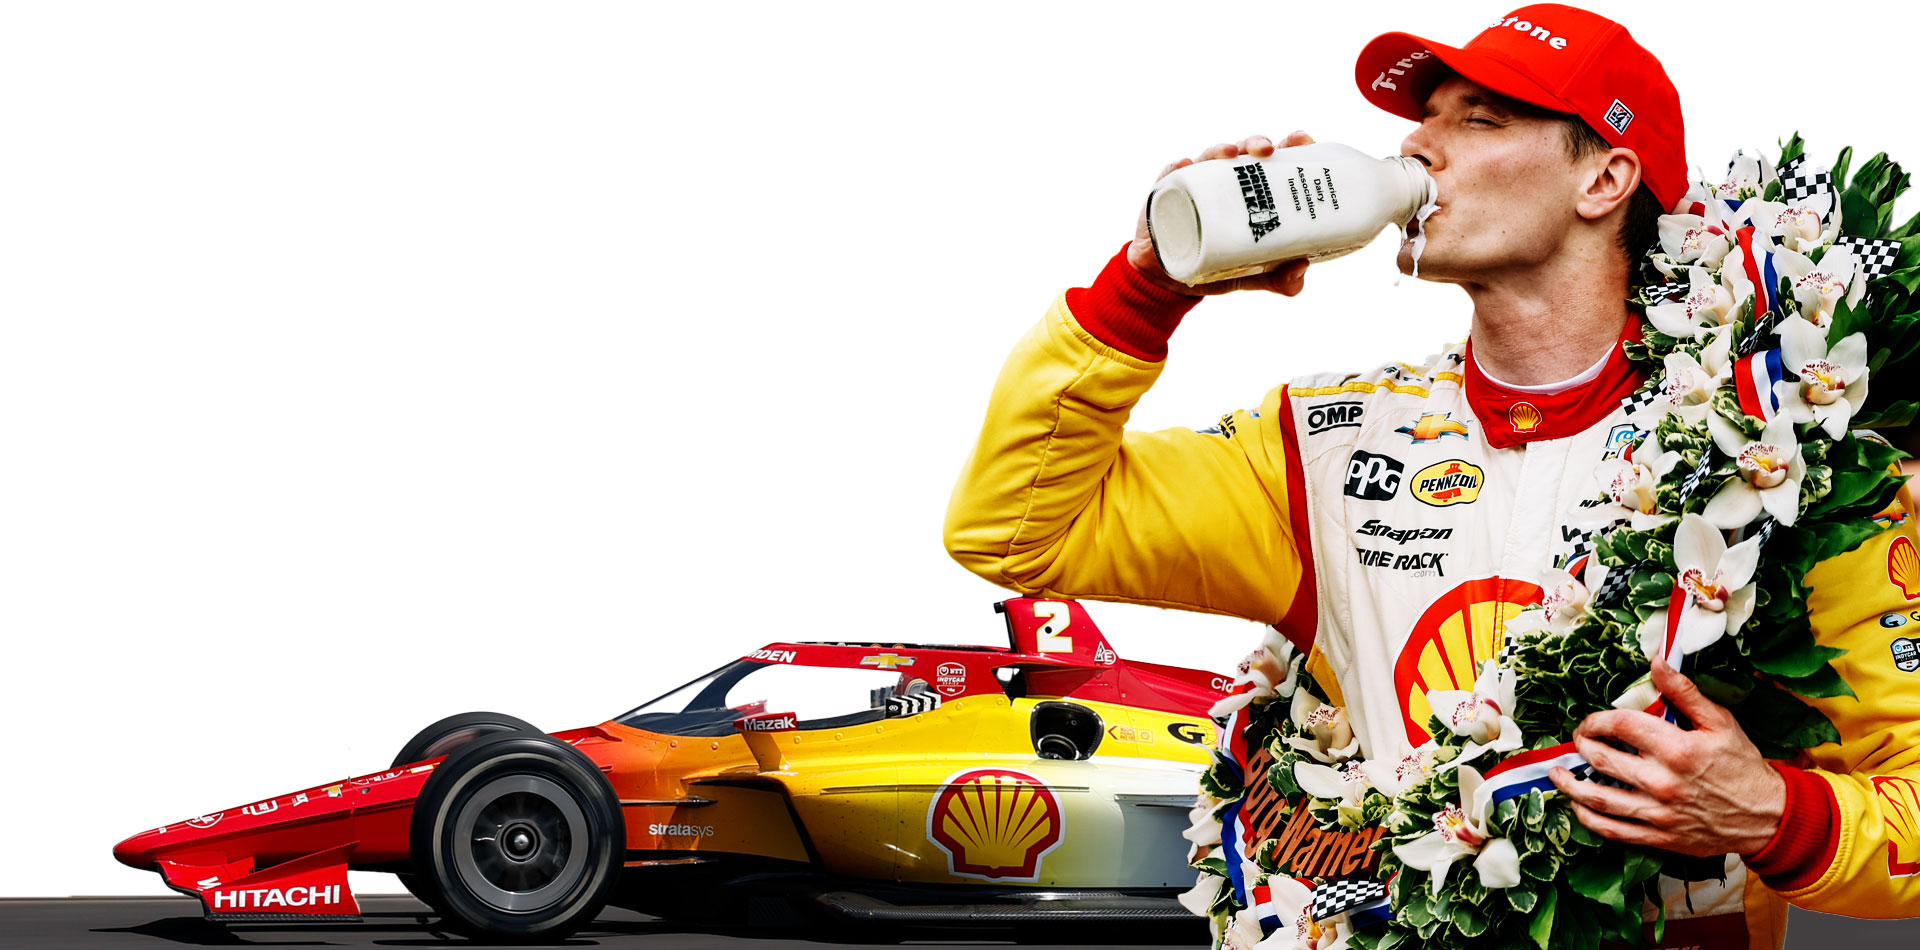 A composite image of Josef Newgarden celebrating victory in the 2024 Indianapolis 500 and the #2 car